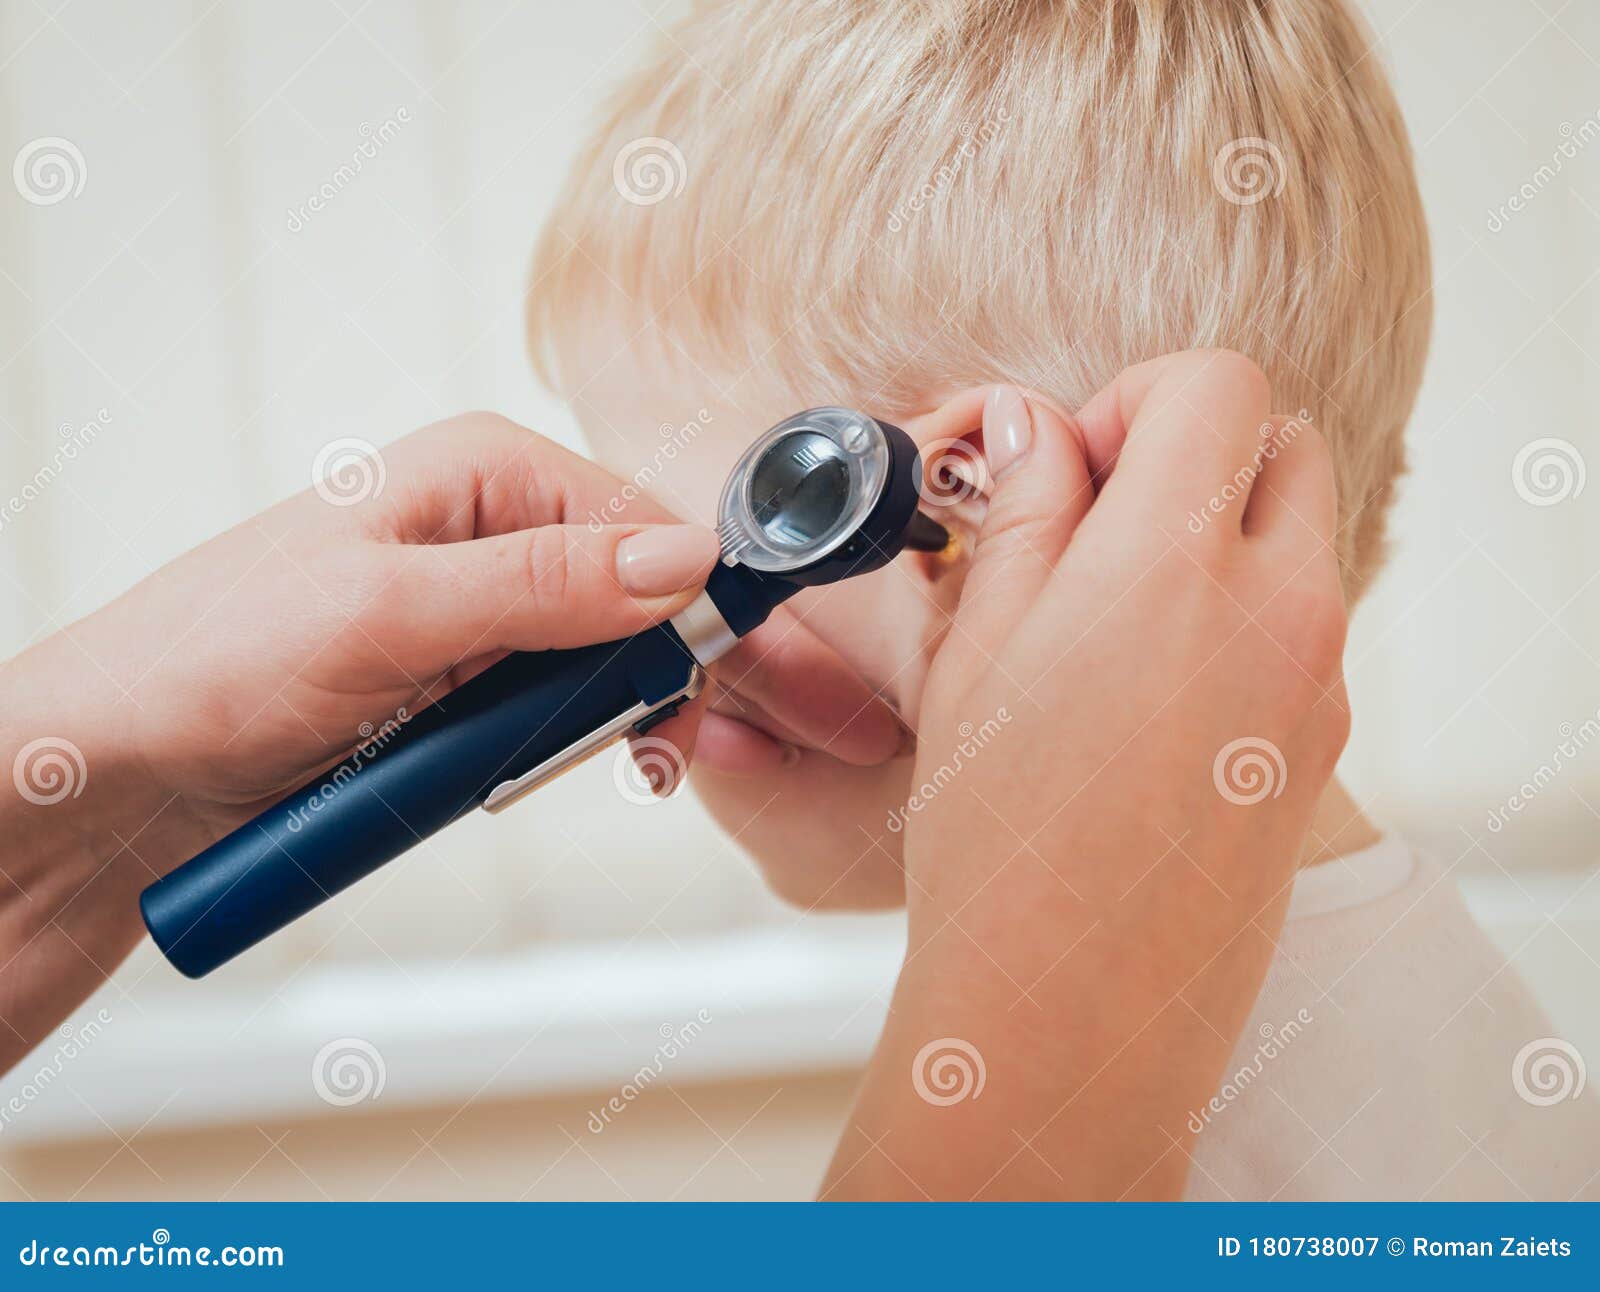 Doctor Examines Ear With Otoscope In A Pediatrician Room Stock Image